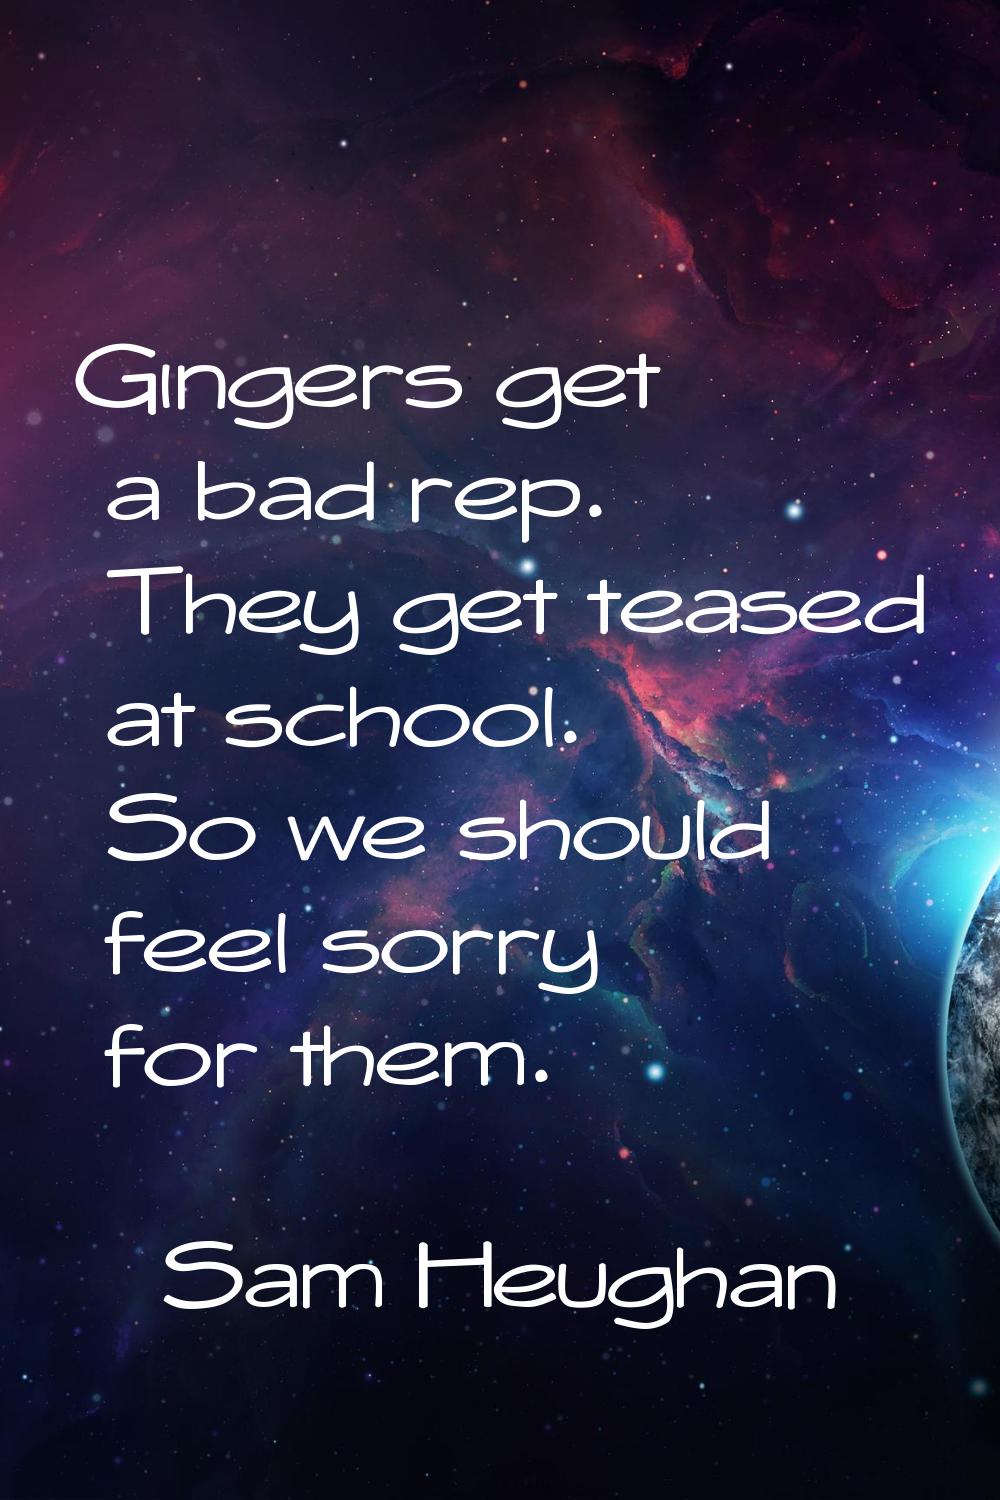 Gingers get a bad rep. They get teased at school. So we should feel sorry for them.